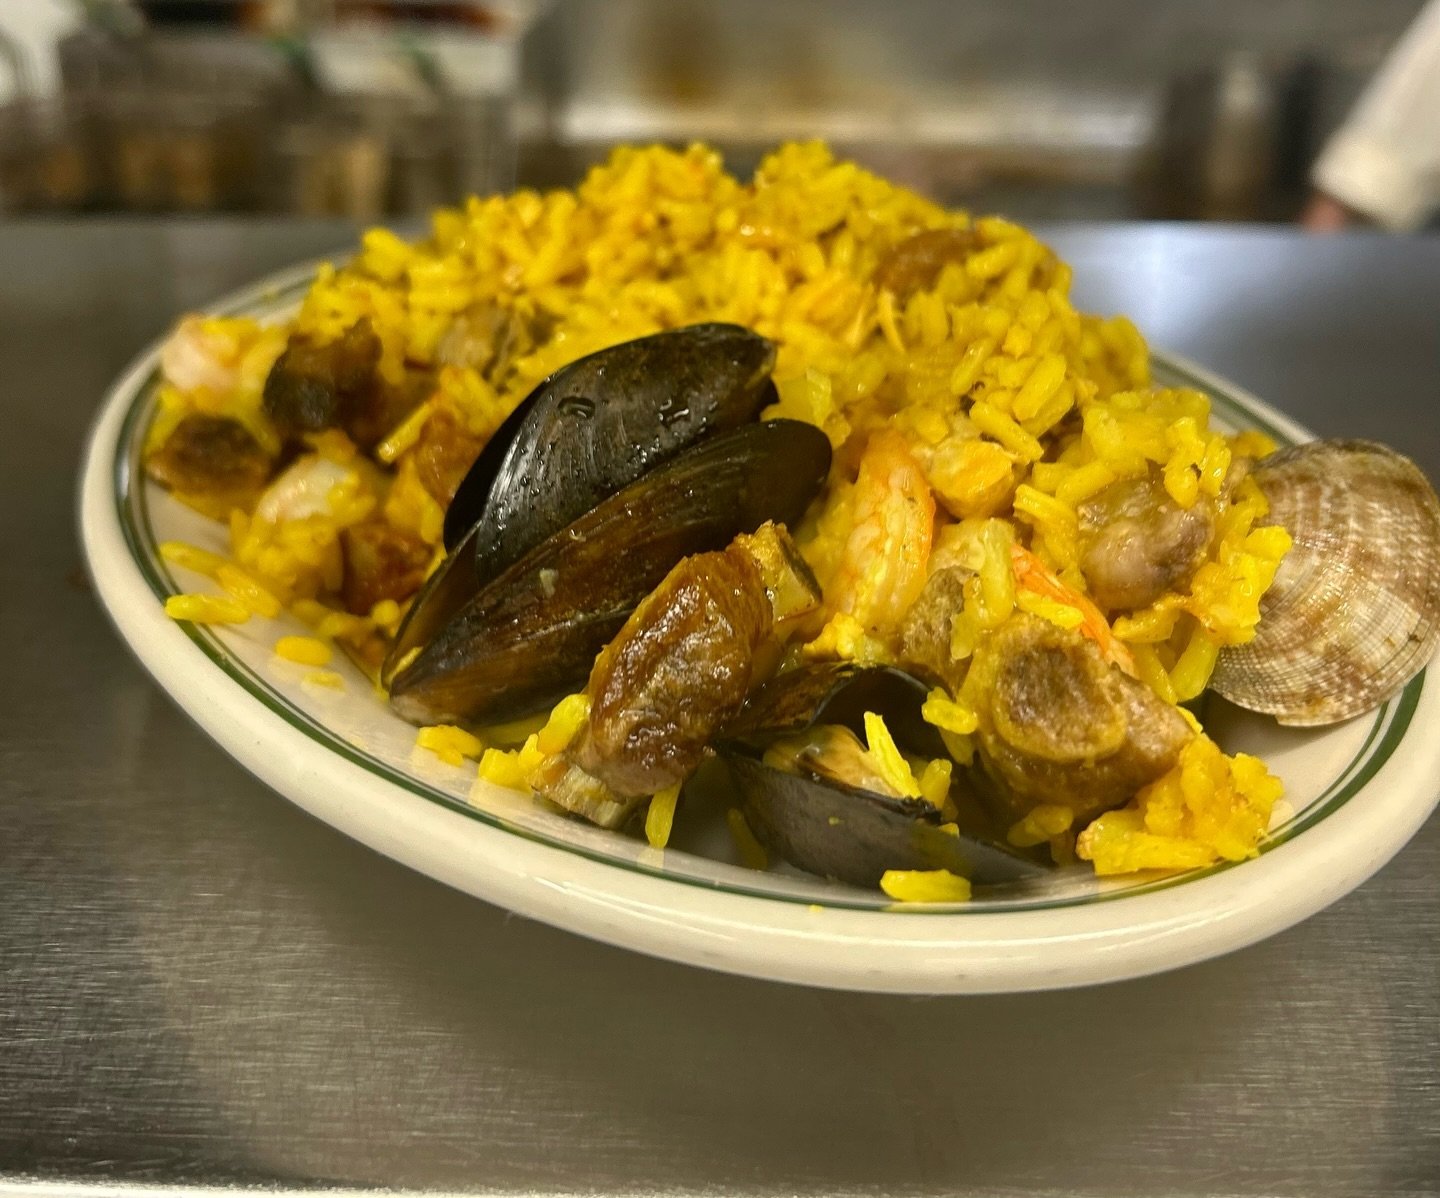 Weekends at The Star just got more flavorful! We&rsquo;ll now be offering our homemade seafood paella for lunch and dinner on Fridays and Saturdays. 🥘 🌟
Available for dine in, take out, or delivery 🍽️